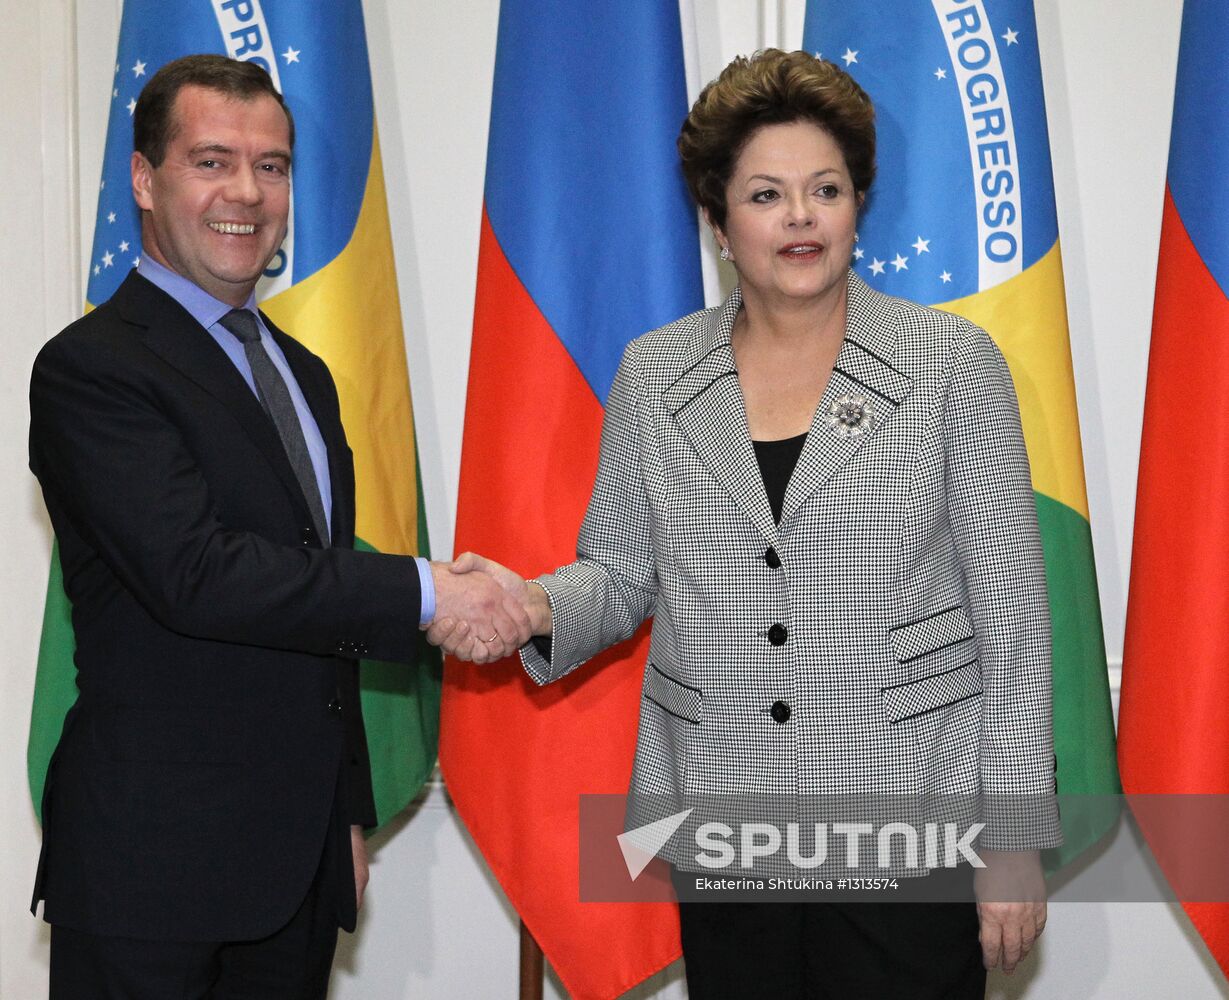 Dmitry Medvedev meets with Dilma Rousseff